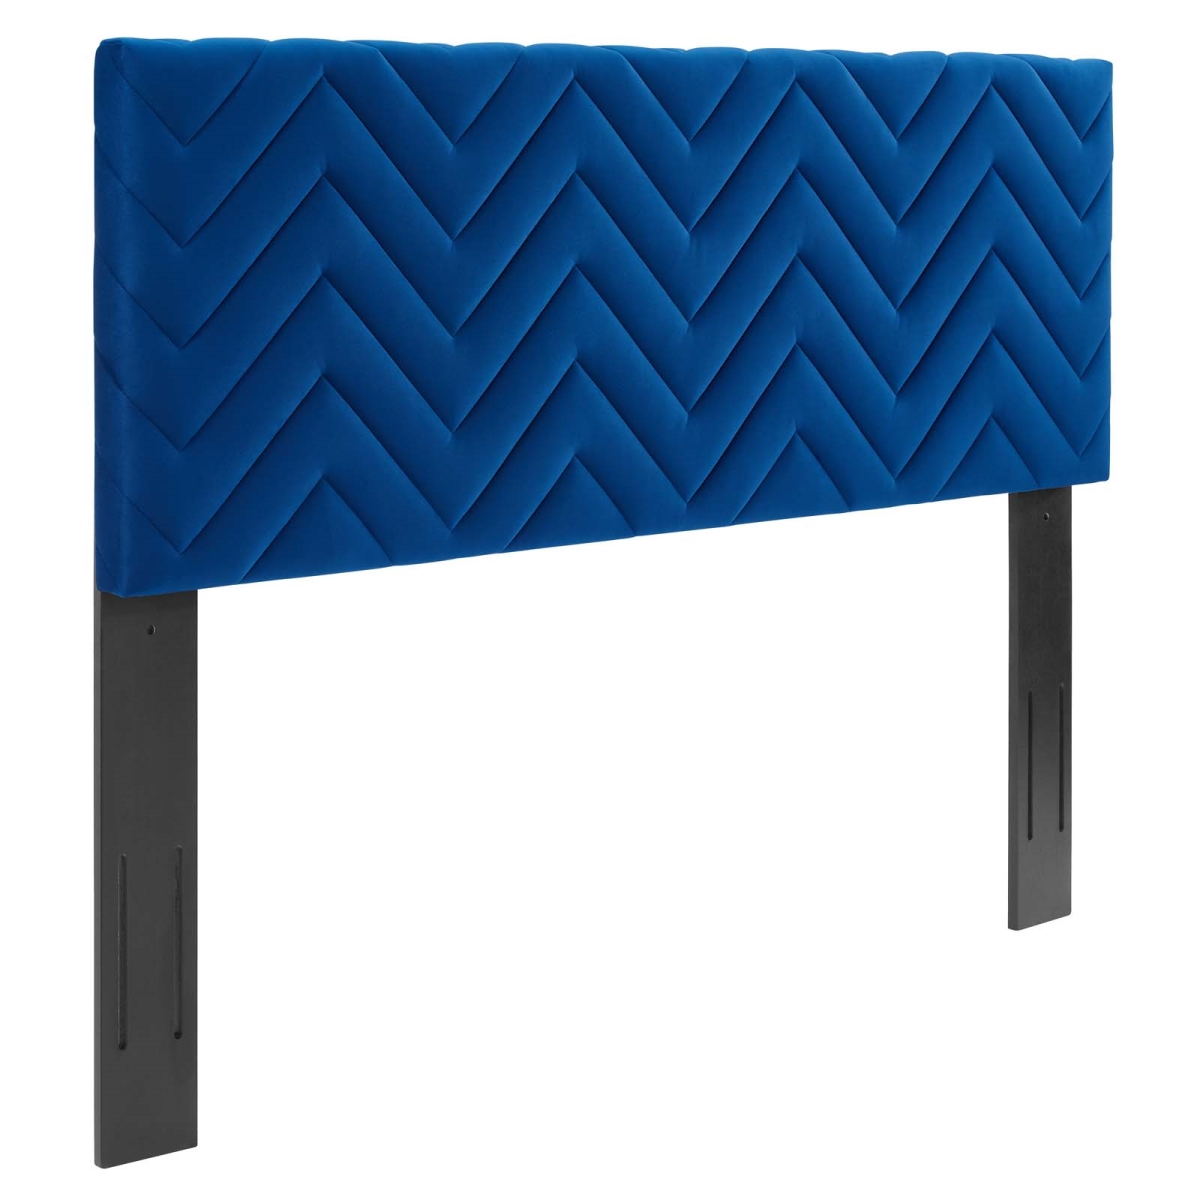 Picture of Modway Furniture MOD-6658-NAV 22.5 x 39 x 0.5 in. Mercy Chevron Tufted Performance Velvet Twin Size Headboard, Navy Blue